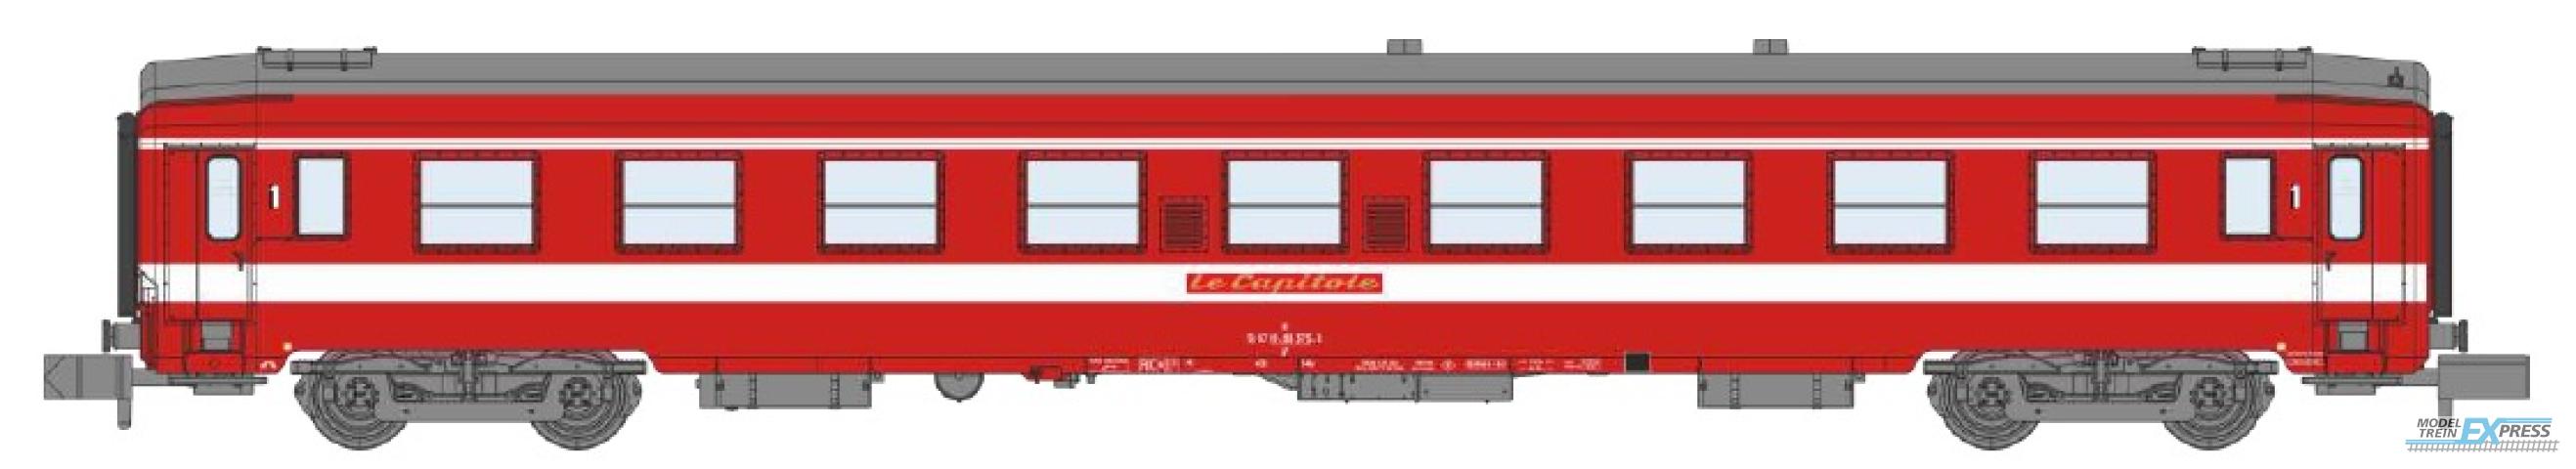 REE models NW-157 UIC Car A9 Era IV Red "LE CAPITOLE"